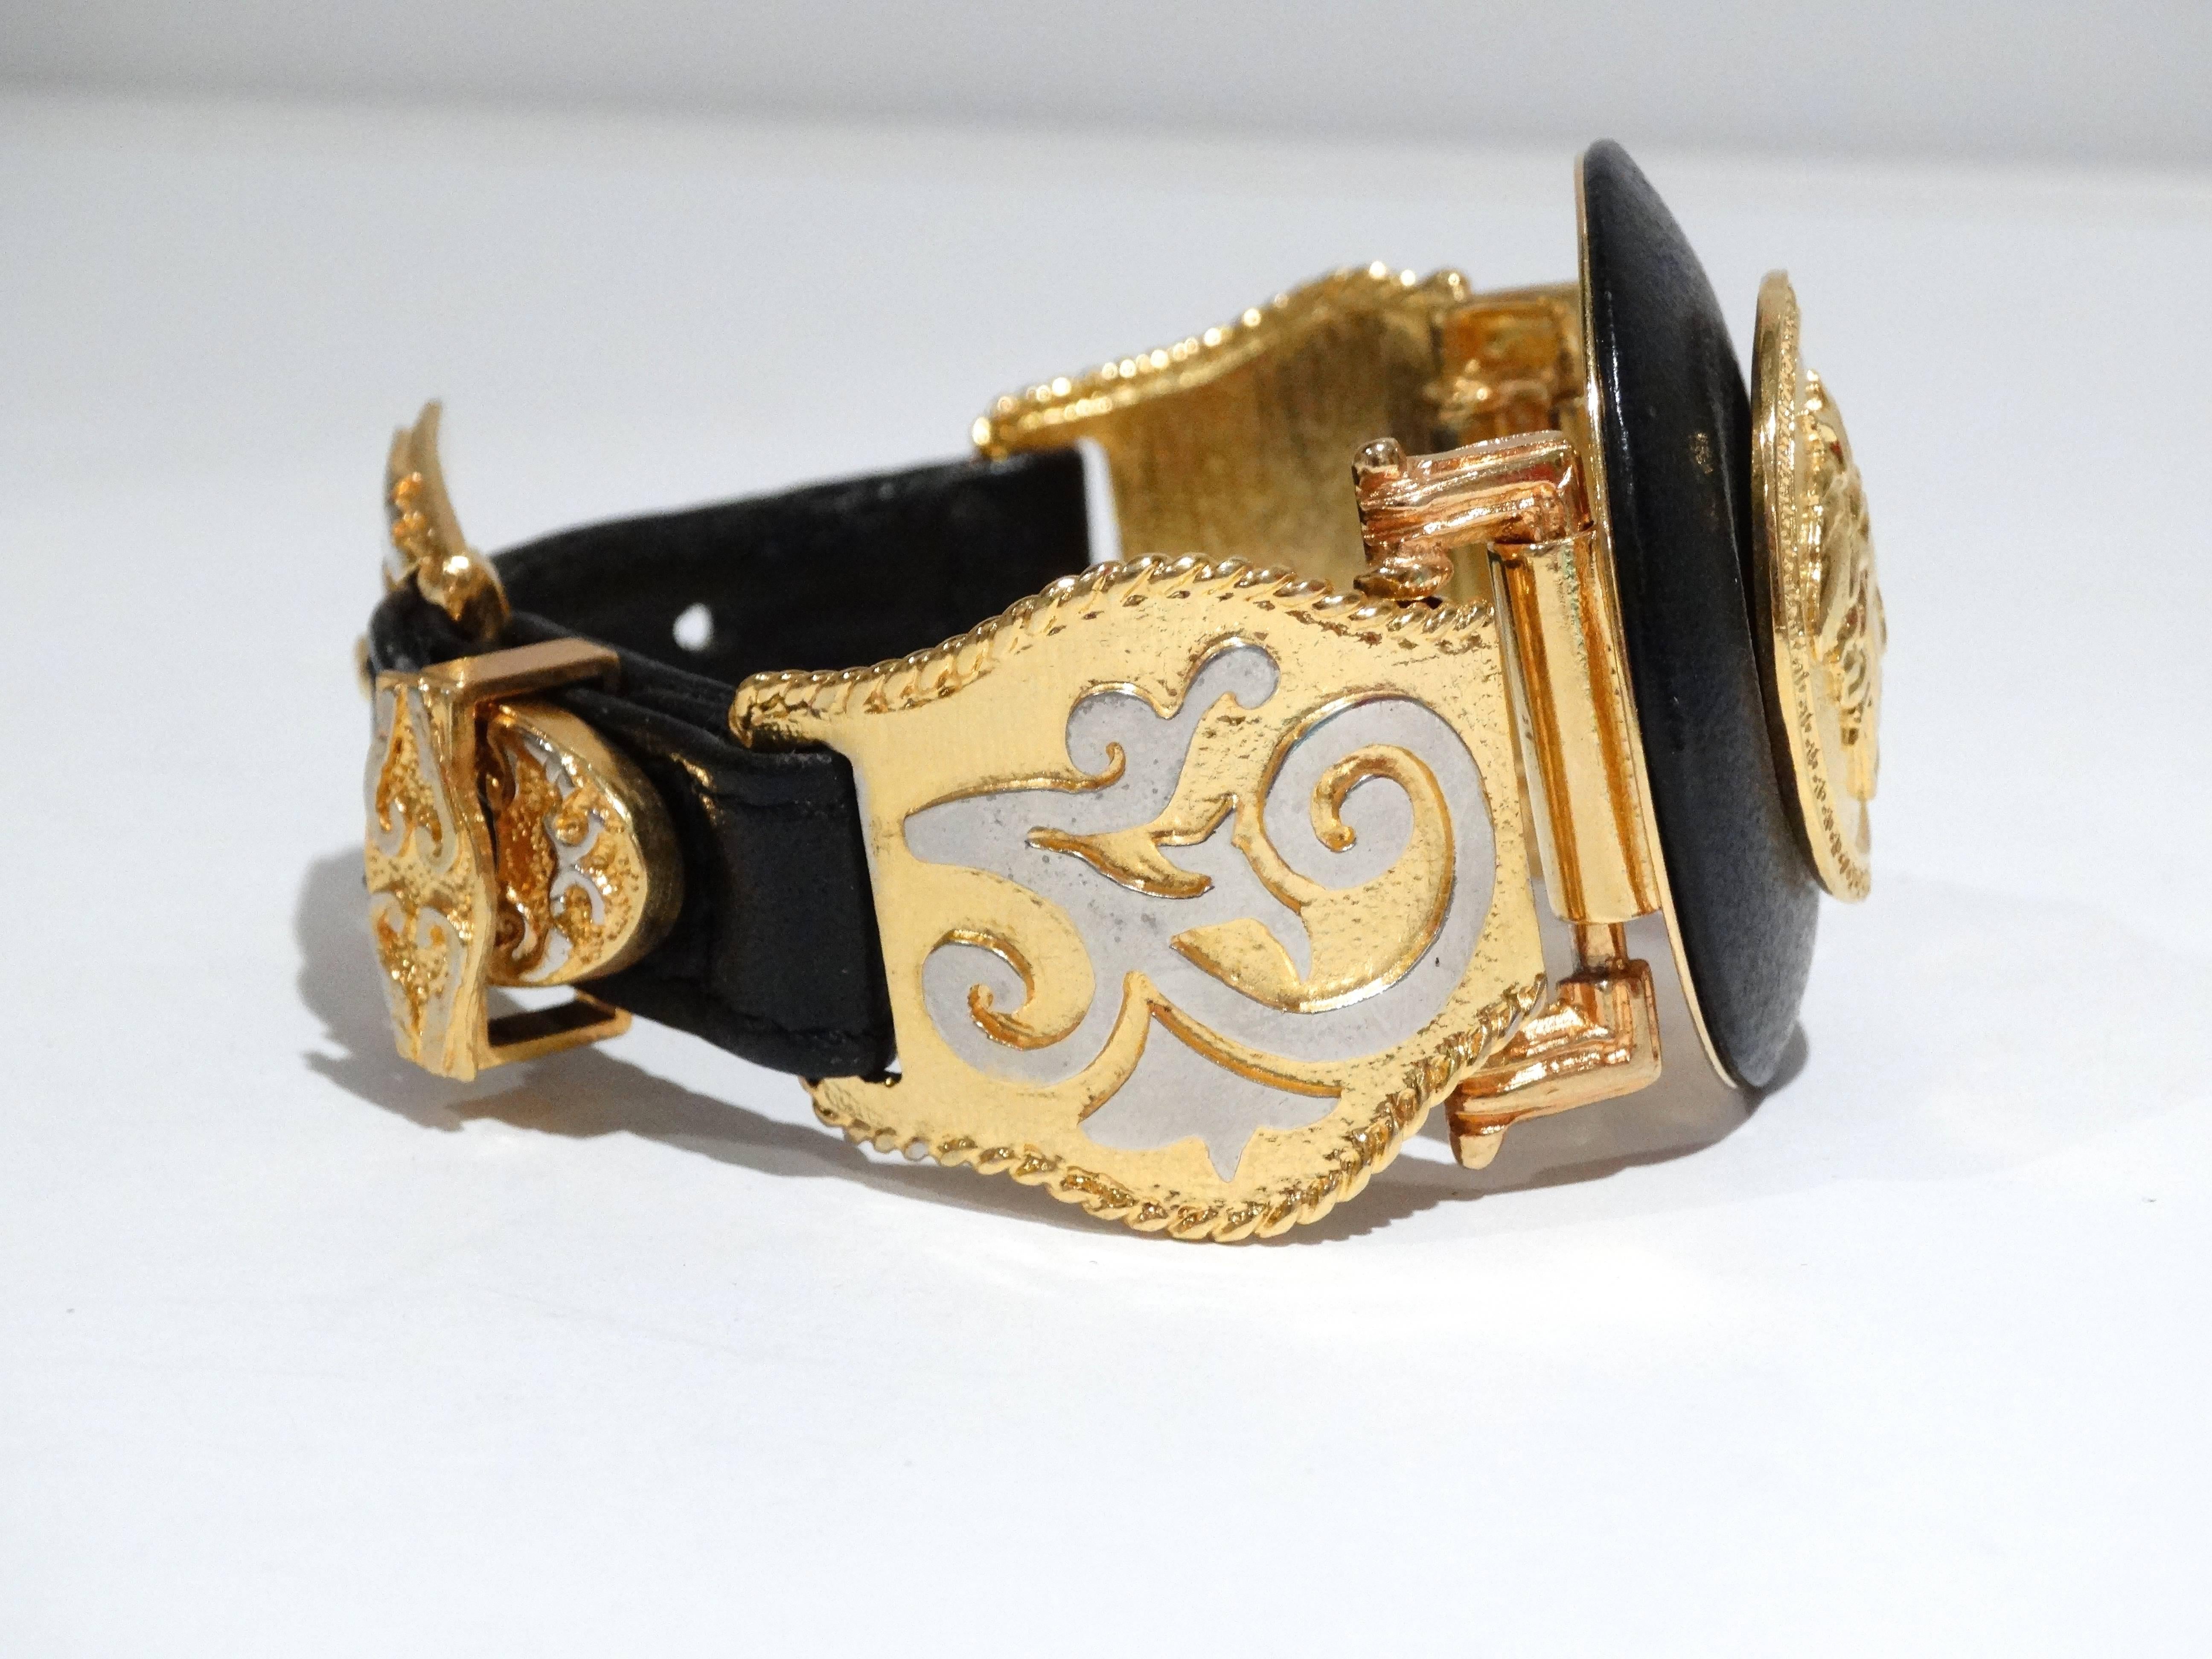 This 1990's Gianni Versace Iconic Medusa buckle bracelet is a RARE piece. Featuring a large Medusa Medallion with black leather trim. Gold plated side hardware with a leather buckle closure. A true treasure for Versace collectors. Original designed